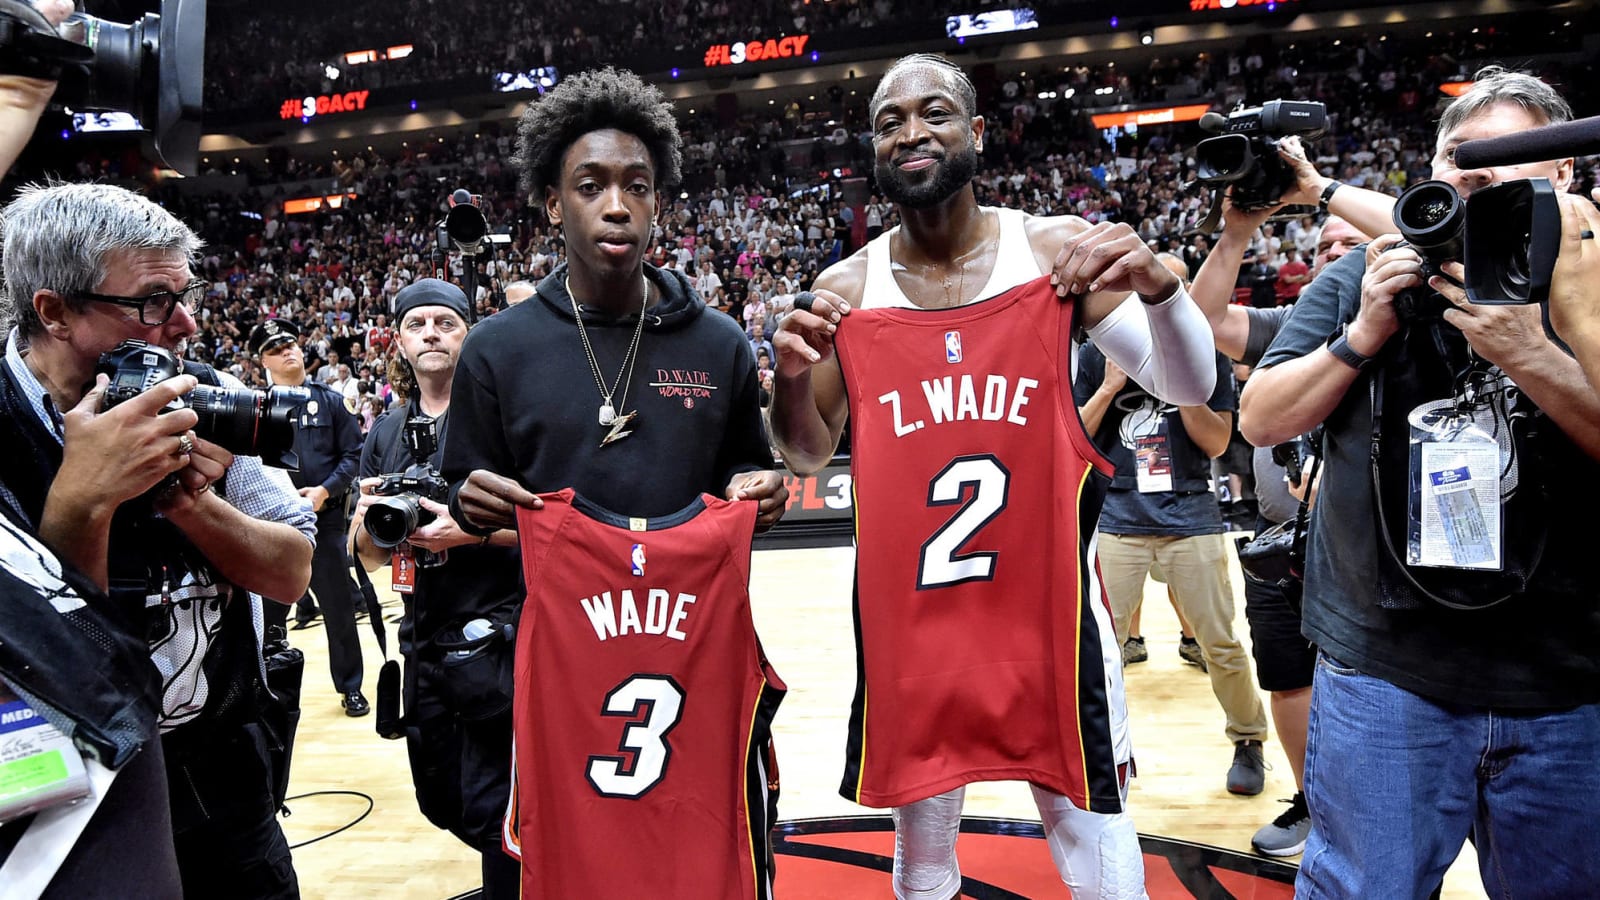 Dwyane Wade has issue with son Zaire’s high school coach